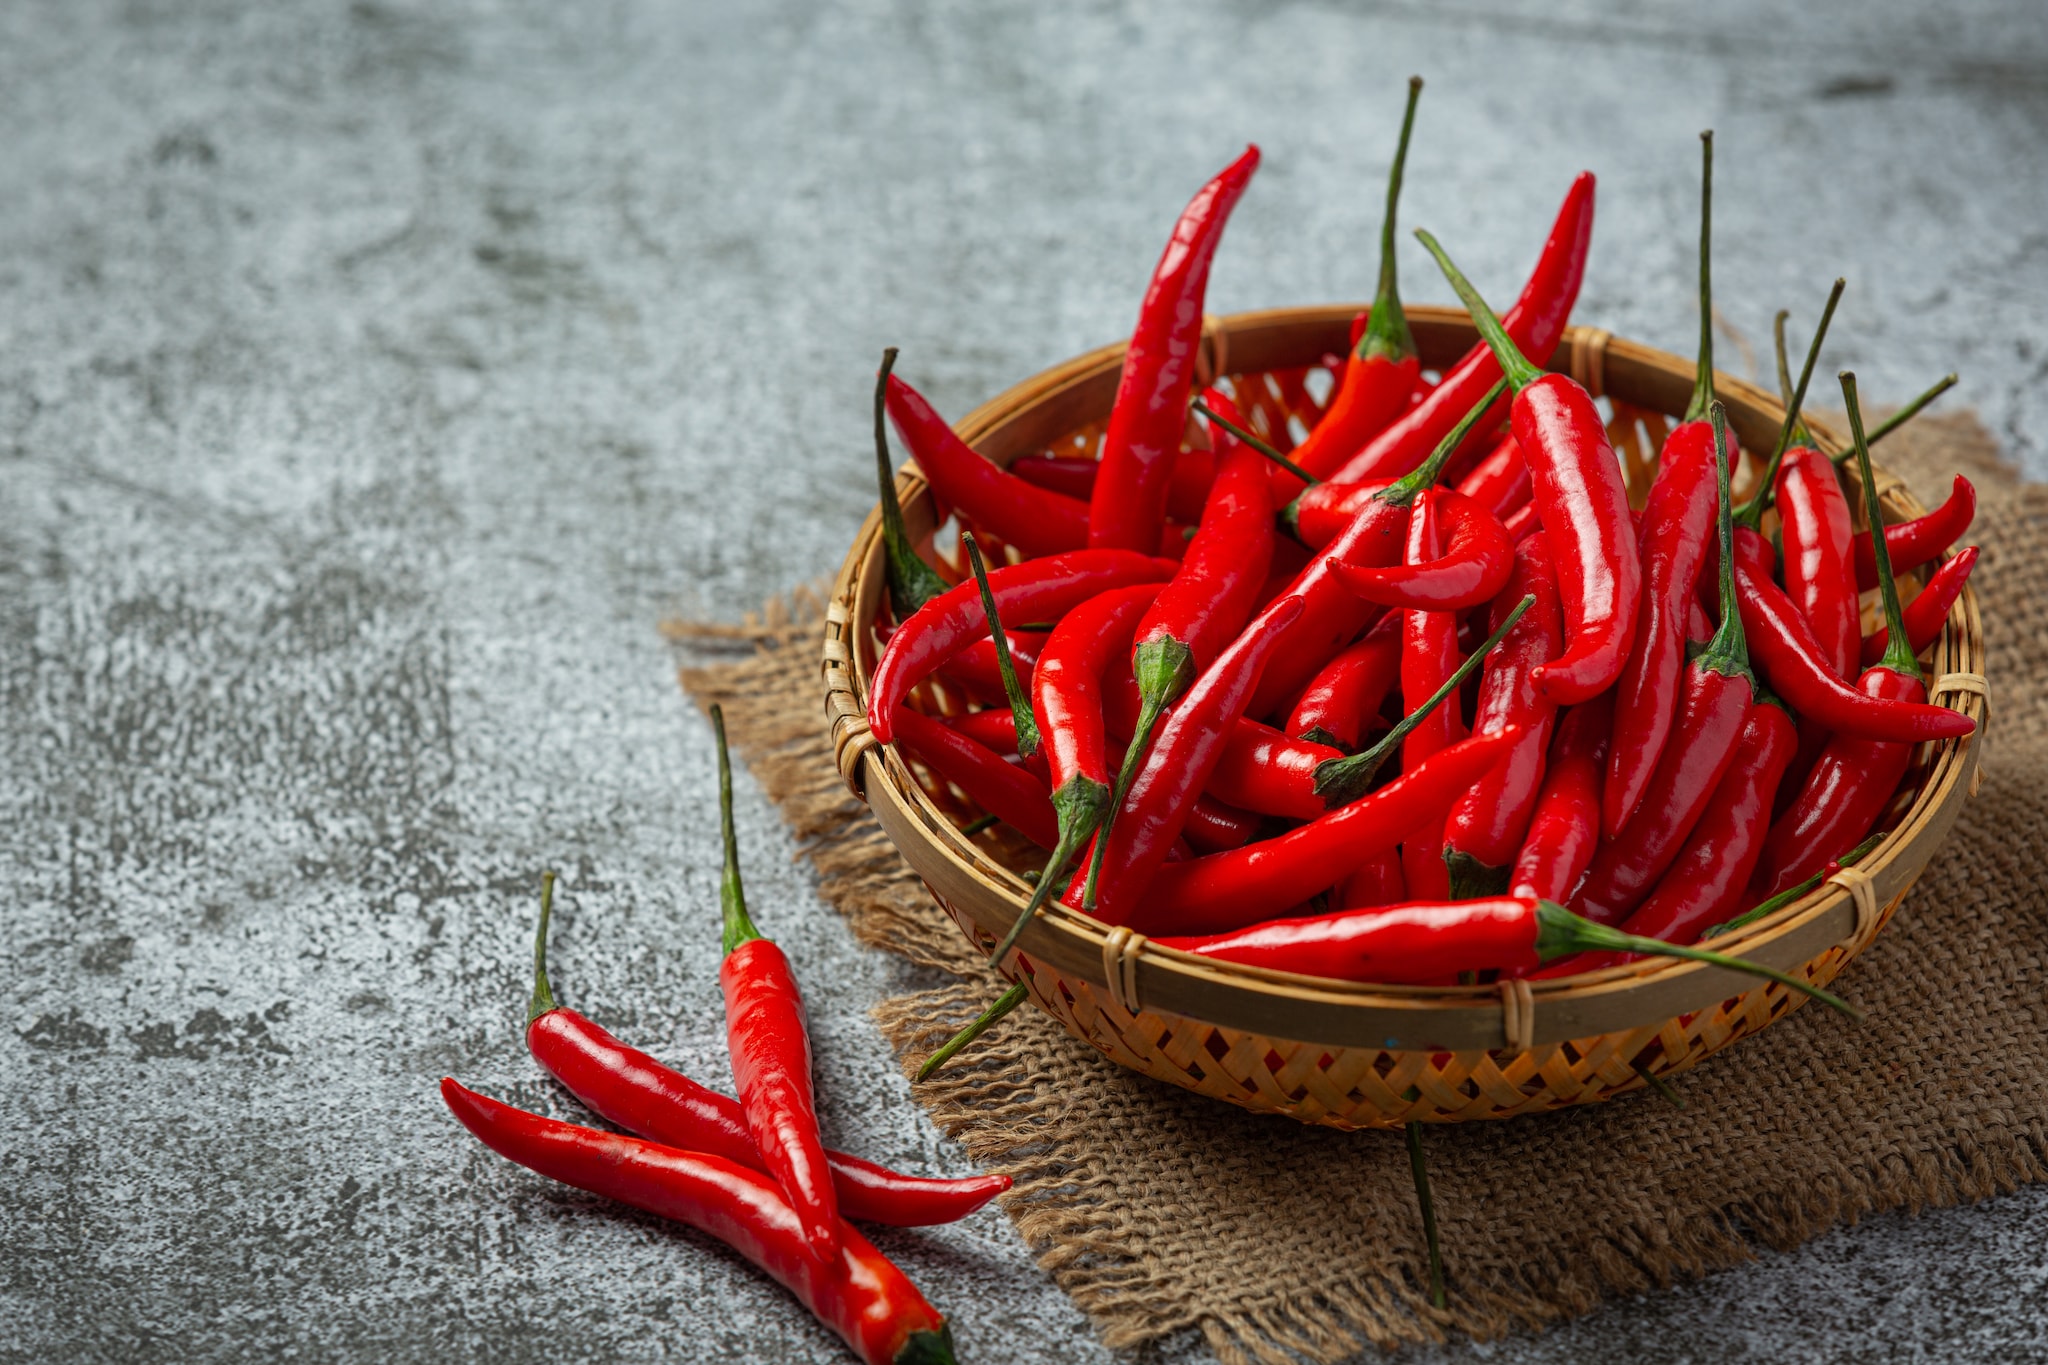 Spicy And Strong; Health Benefits Of Red Chilli Powder - News18